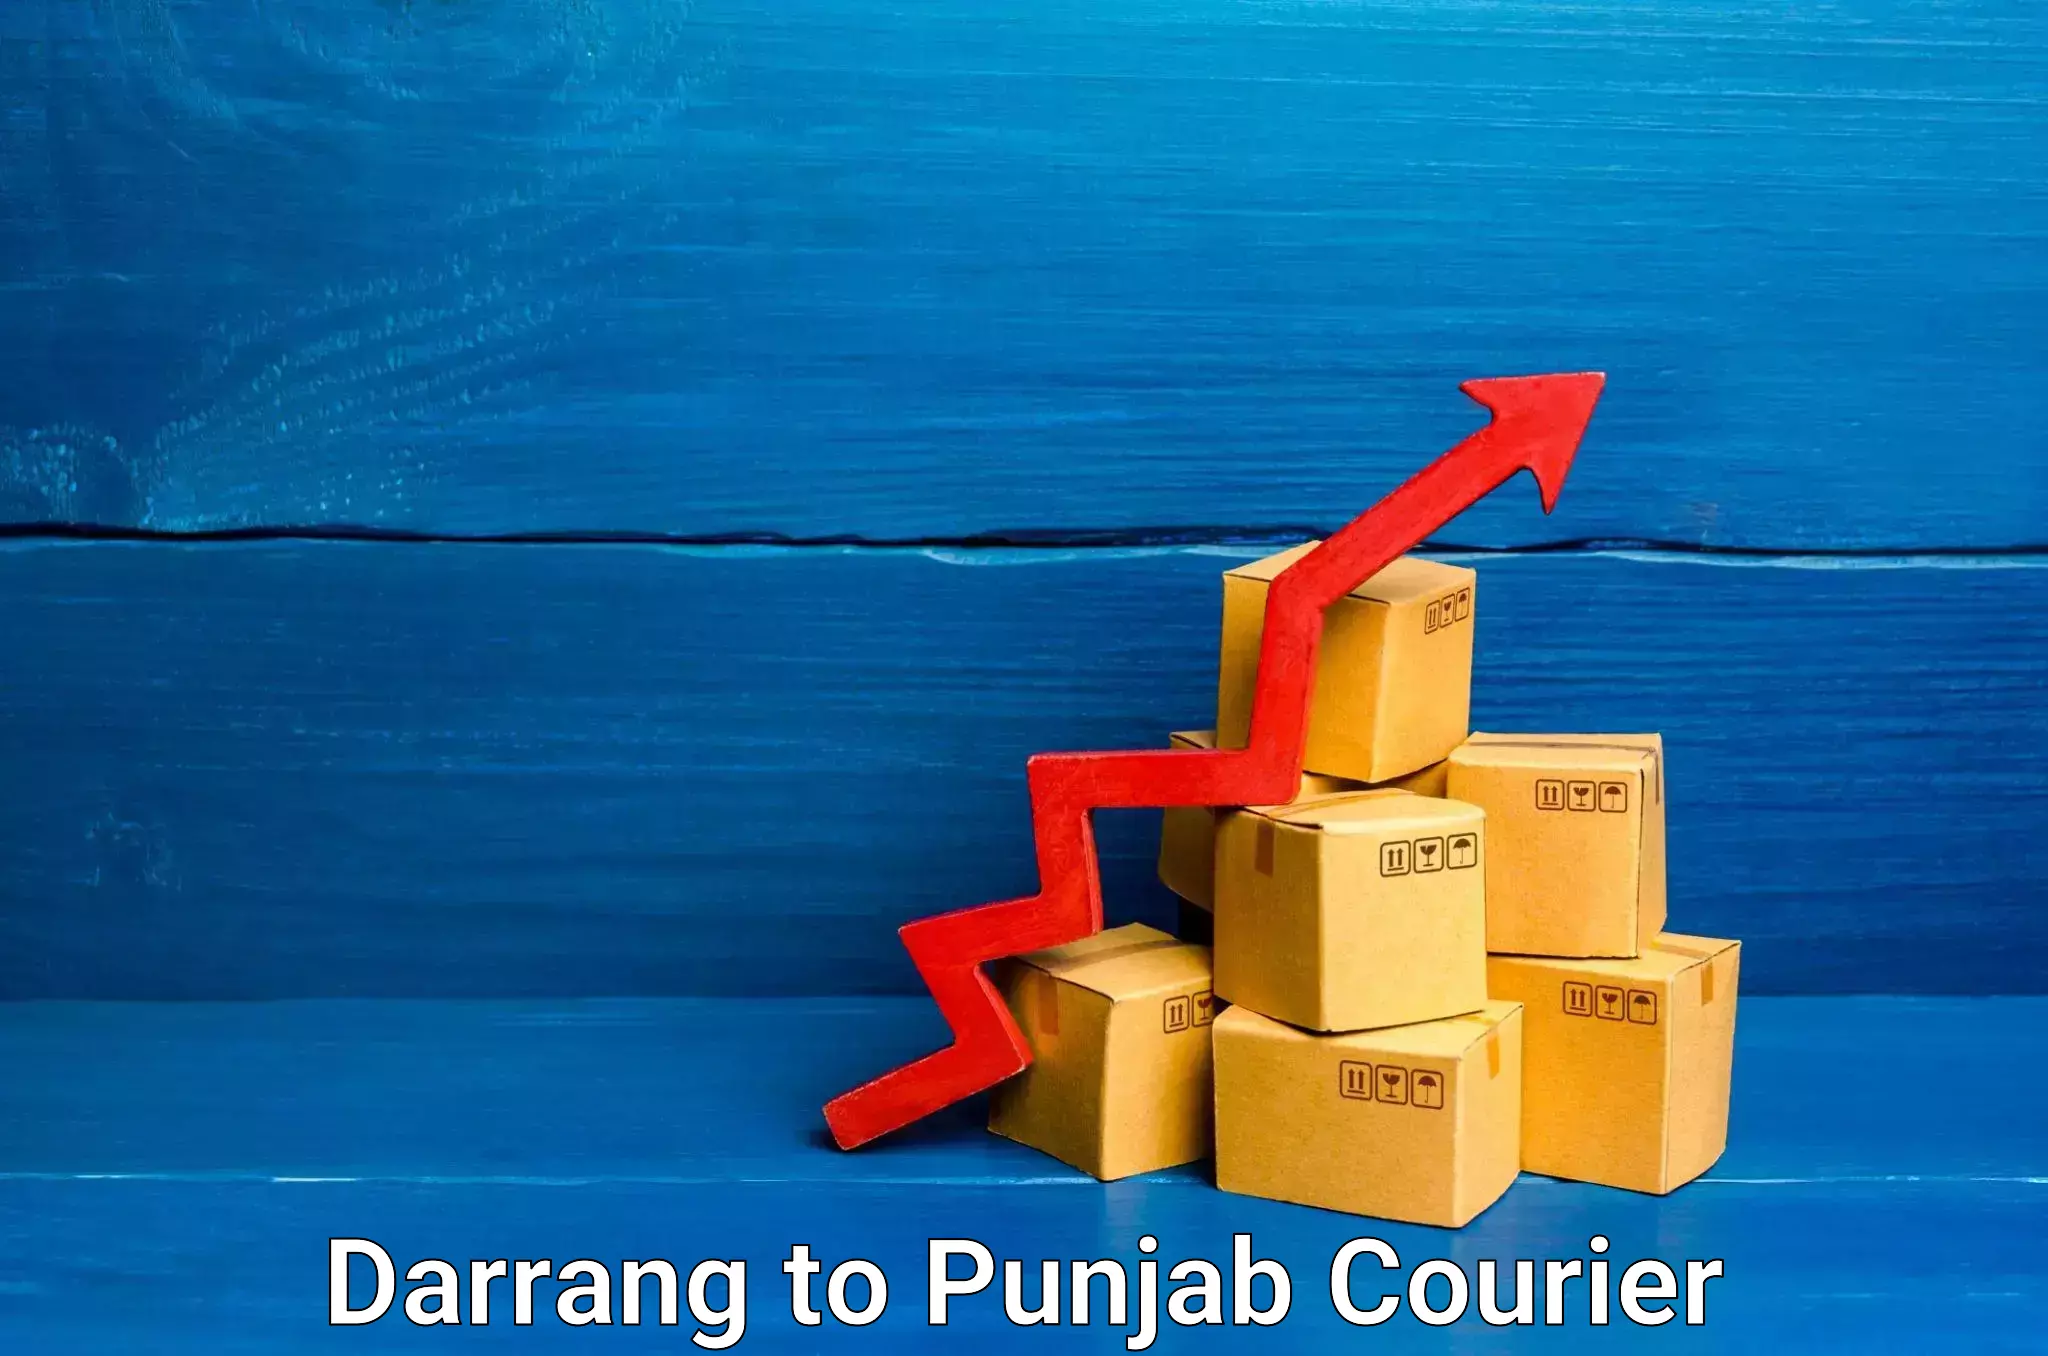 High-speed delivery Darrang to Zirakpur